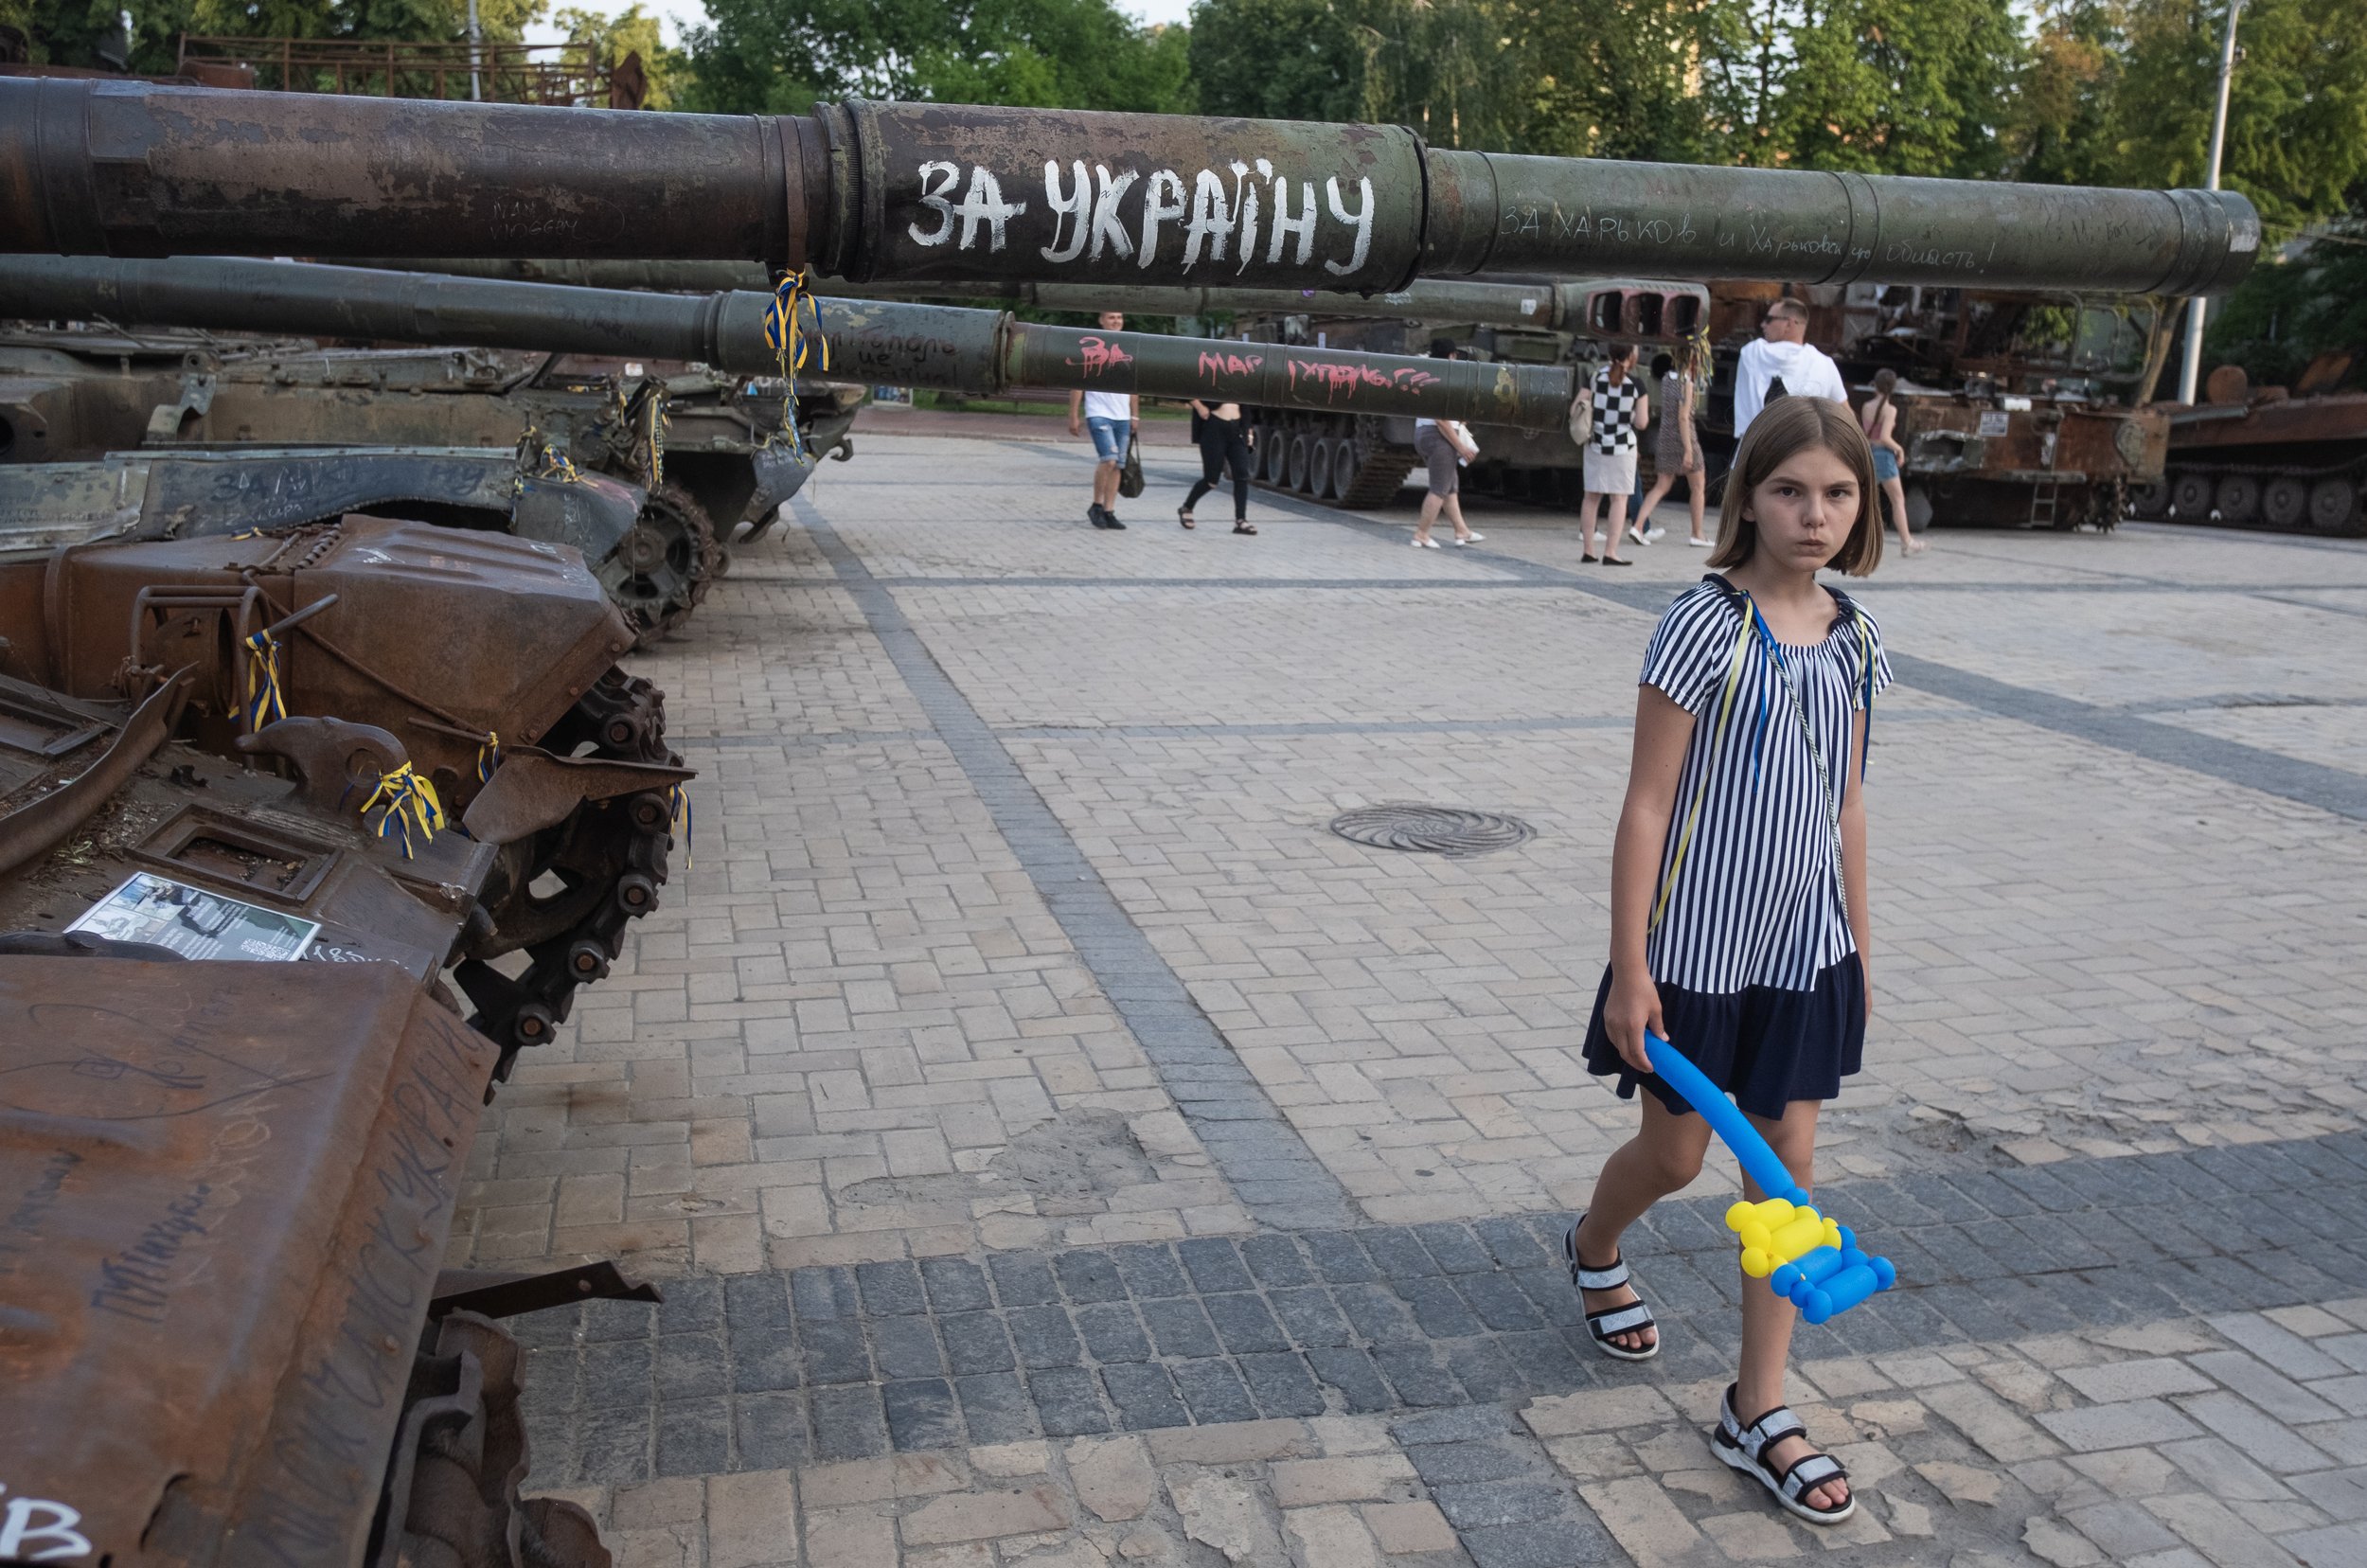  A girl walks past captured and destroyed Russian tanks in Mykhailivska Square in an area that has become an open-air museum for war machines that Ukrainian civilians can visit.   